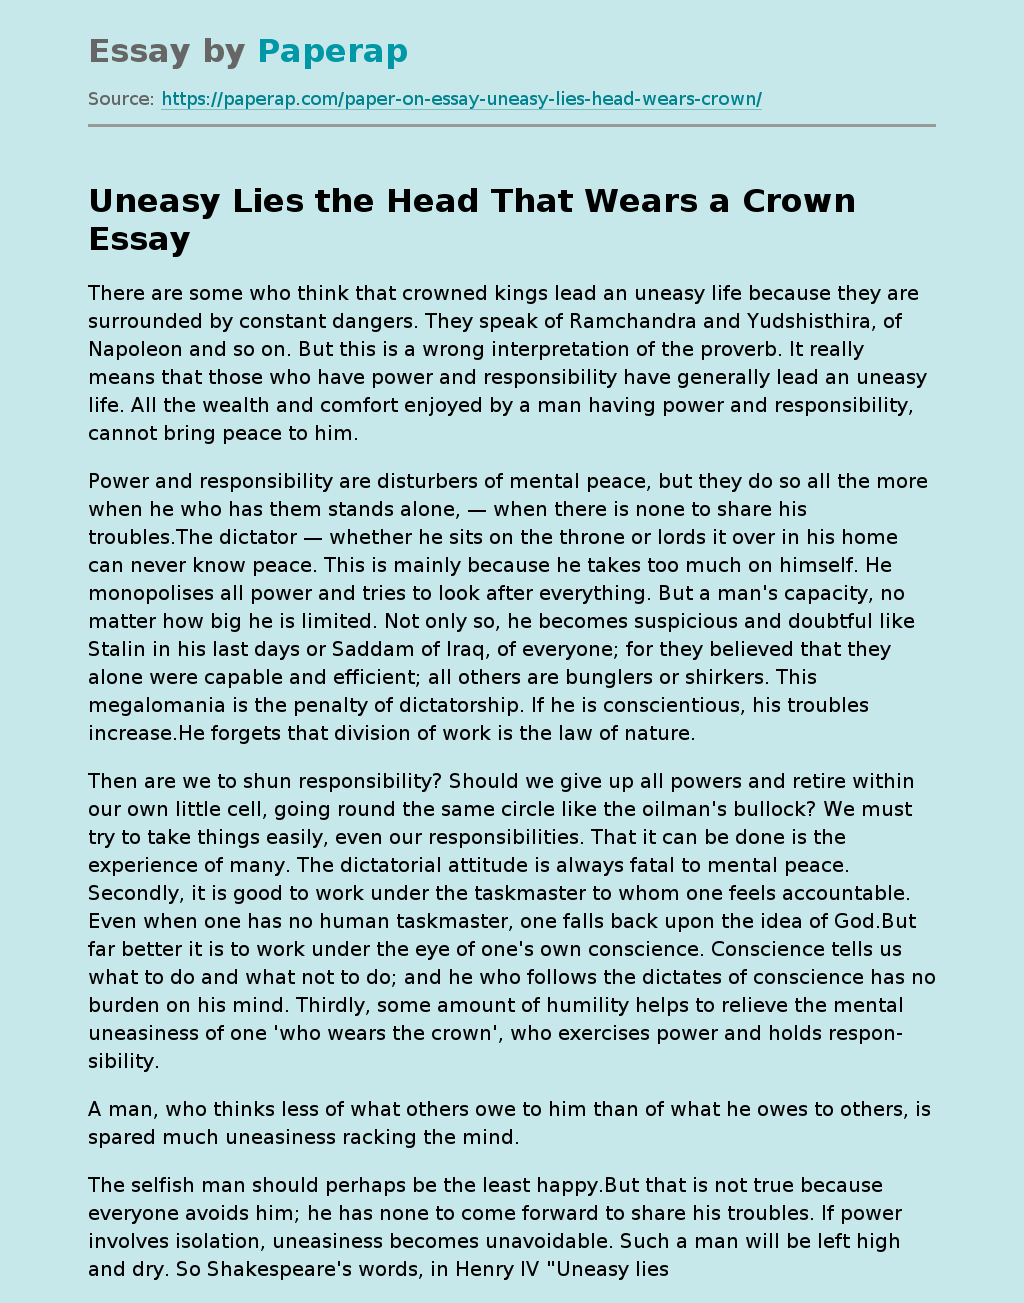 Uneasy Lies the Head That Wears a Crown